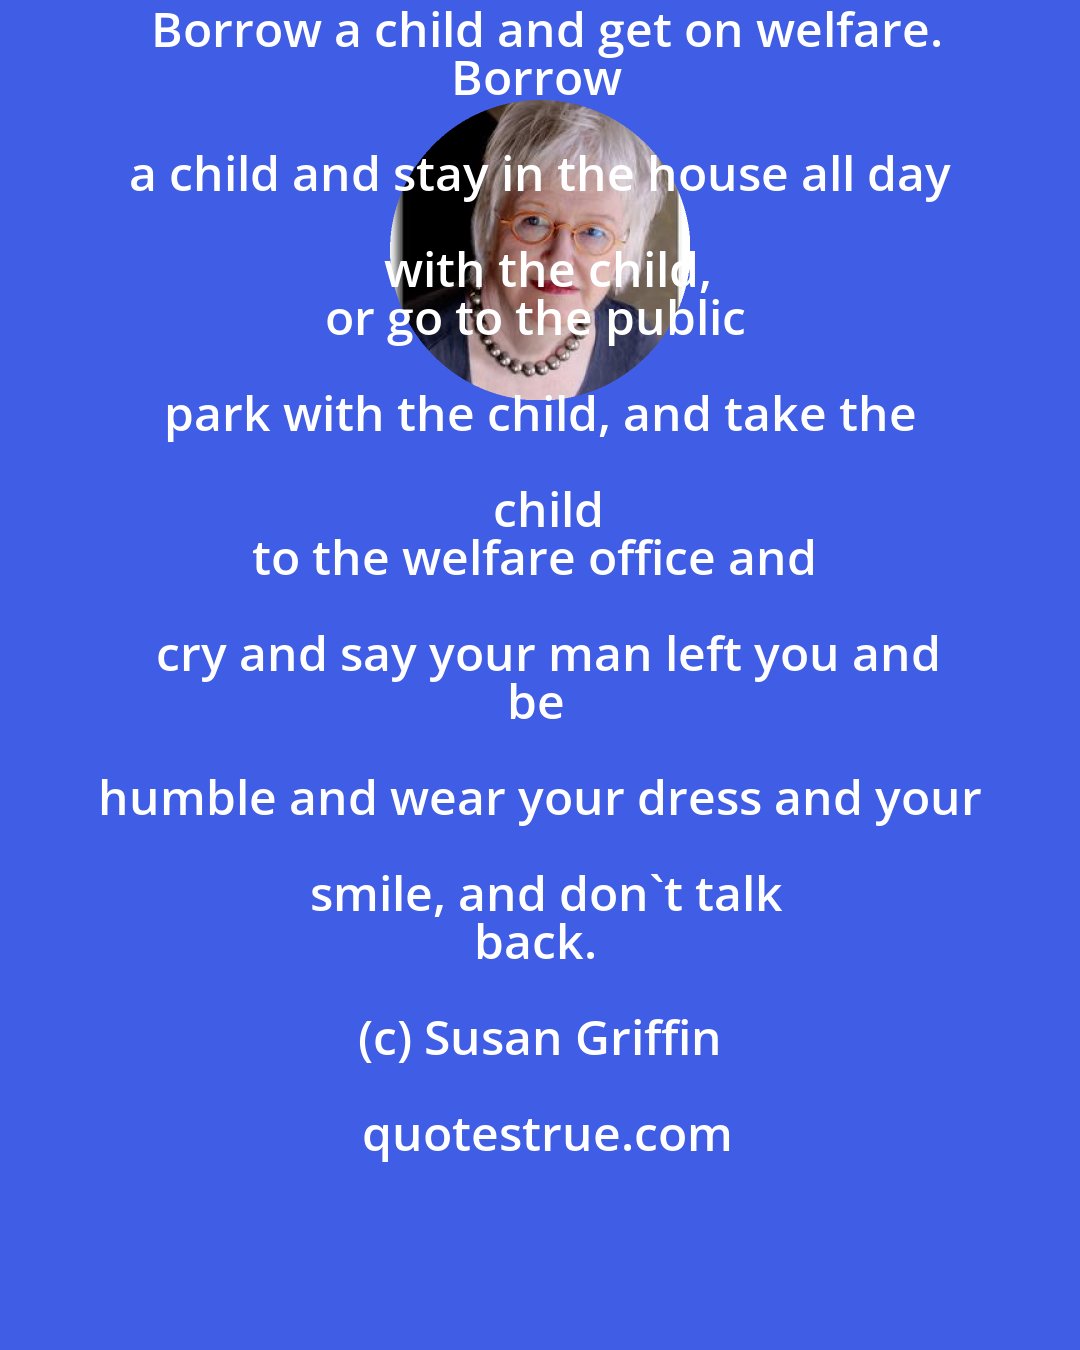 Susan Griffin: Borrow a child and get on welfare.
Borrow a child and stay in the house all day with the child,
or go to the public park with the child, and take the child
to the welfare office and cry and say your man left you and
be humble and wear your dress and your smile, and don't talk
back.